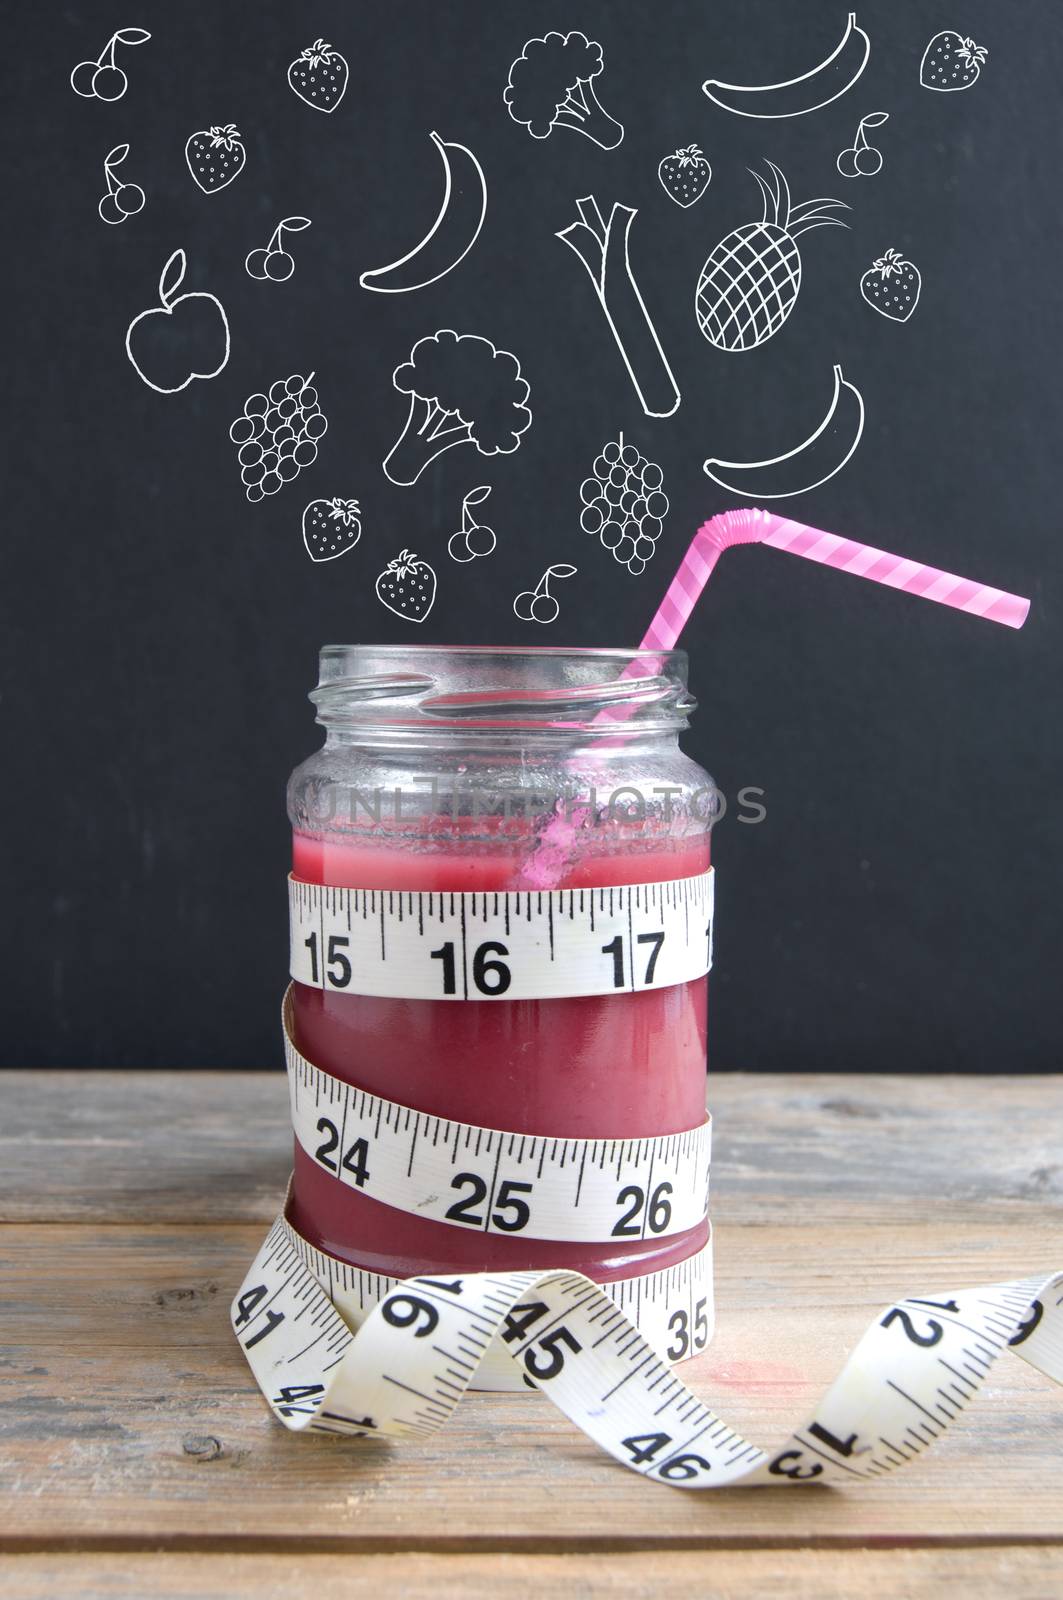 Healthy lifestyle fruits and vegetables sketched on a chalkboard appearing to fall into a smoothie jar with measuring tape